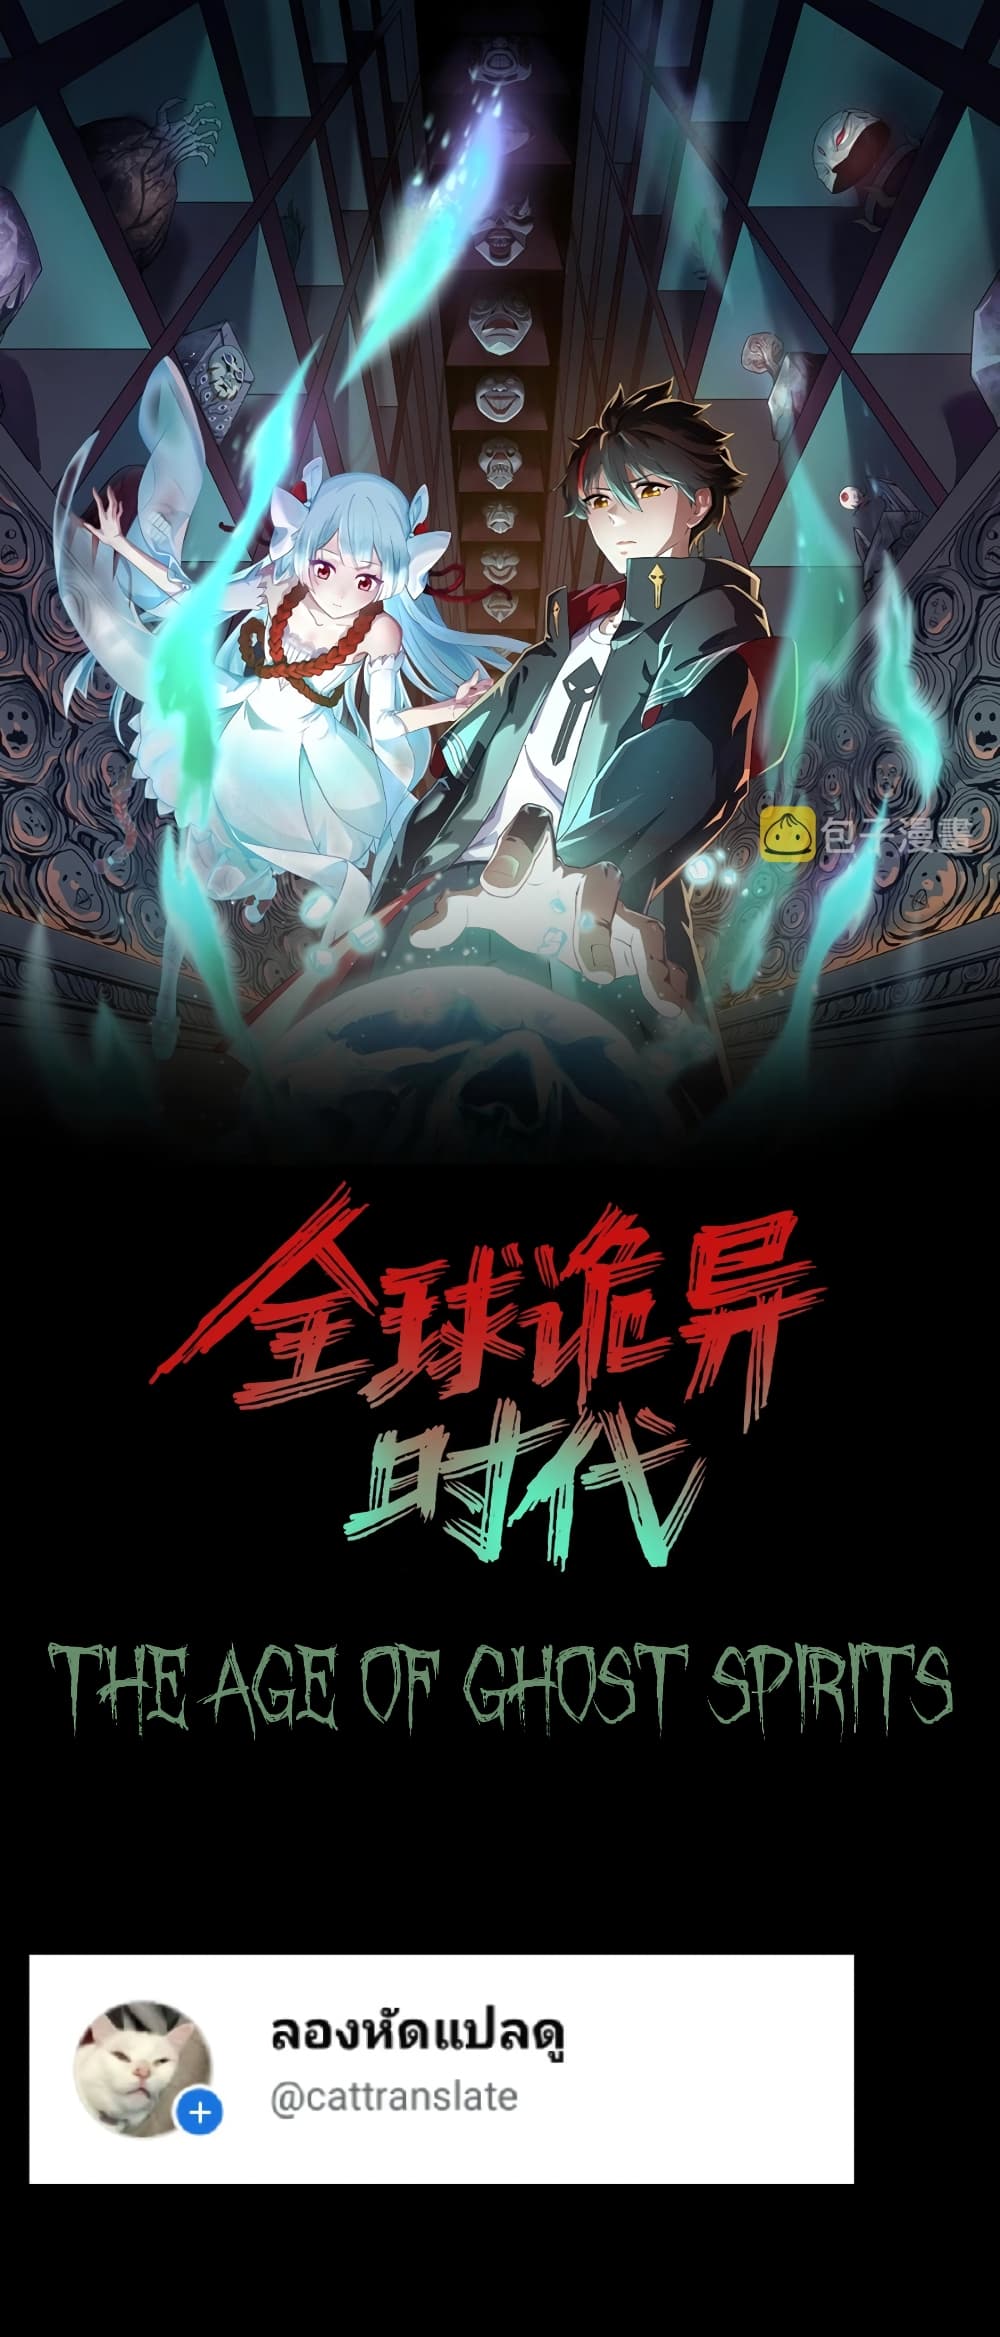 The Age of Ghost Spirits à¸à¸­à¸à¸à¸µà¹ 43 (1)